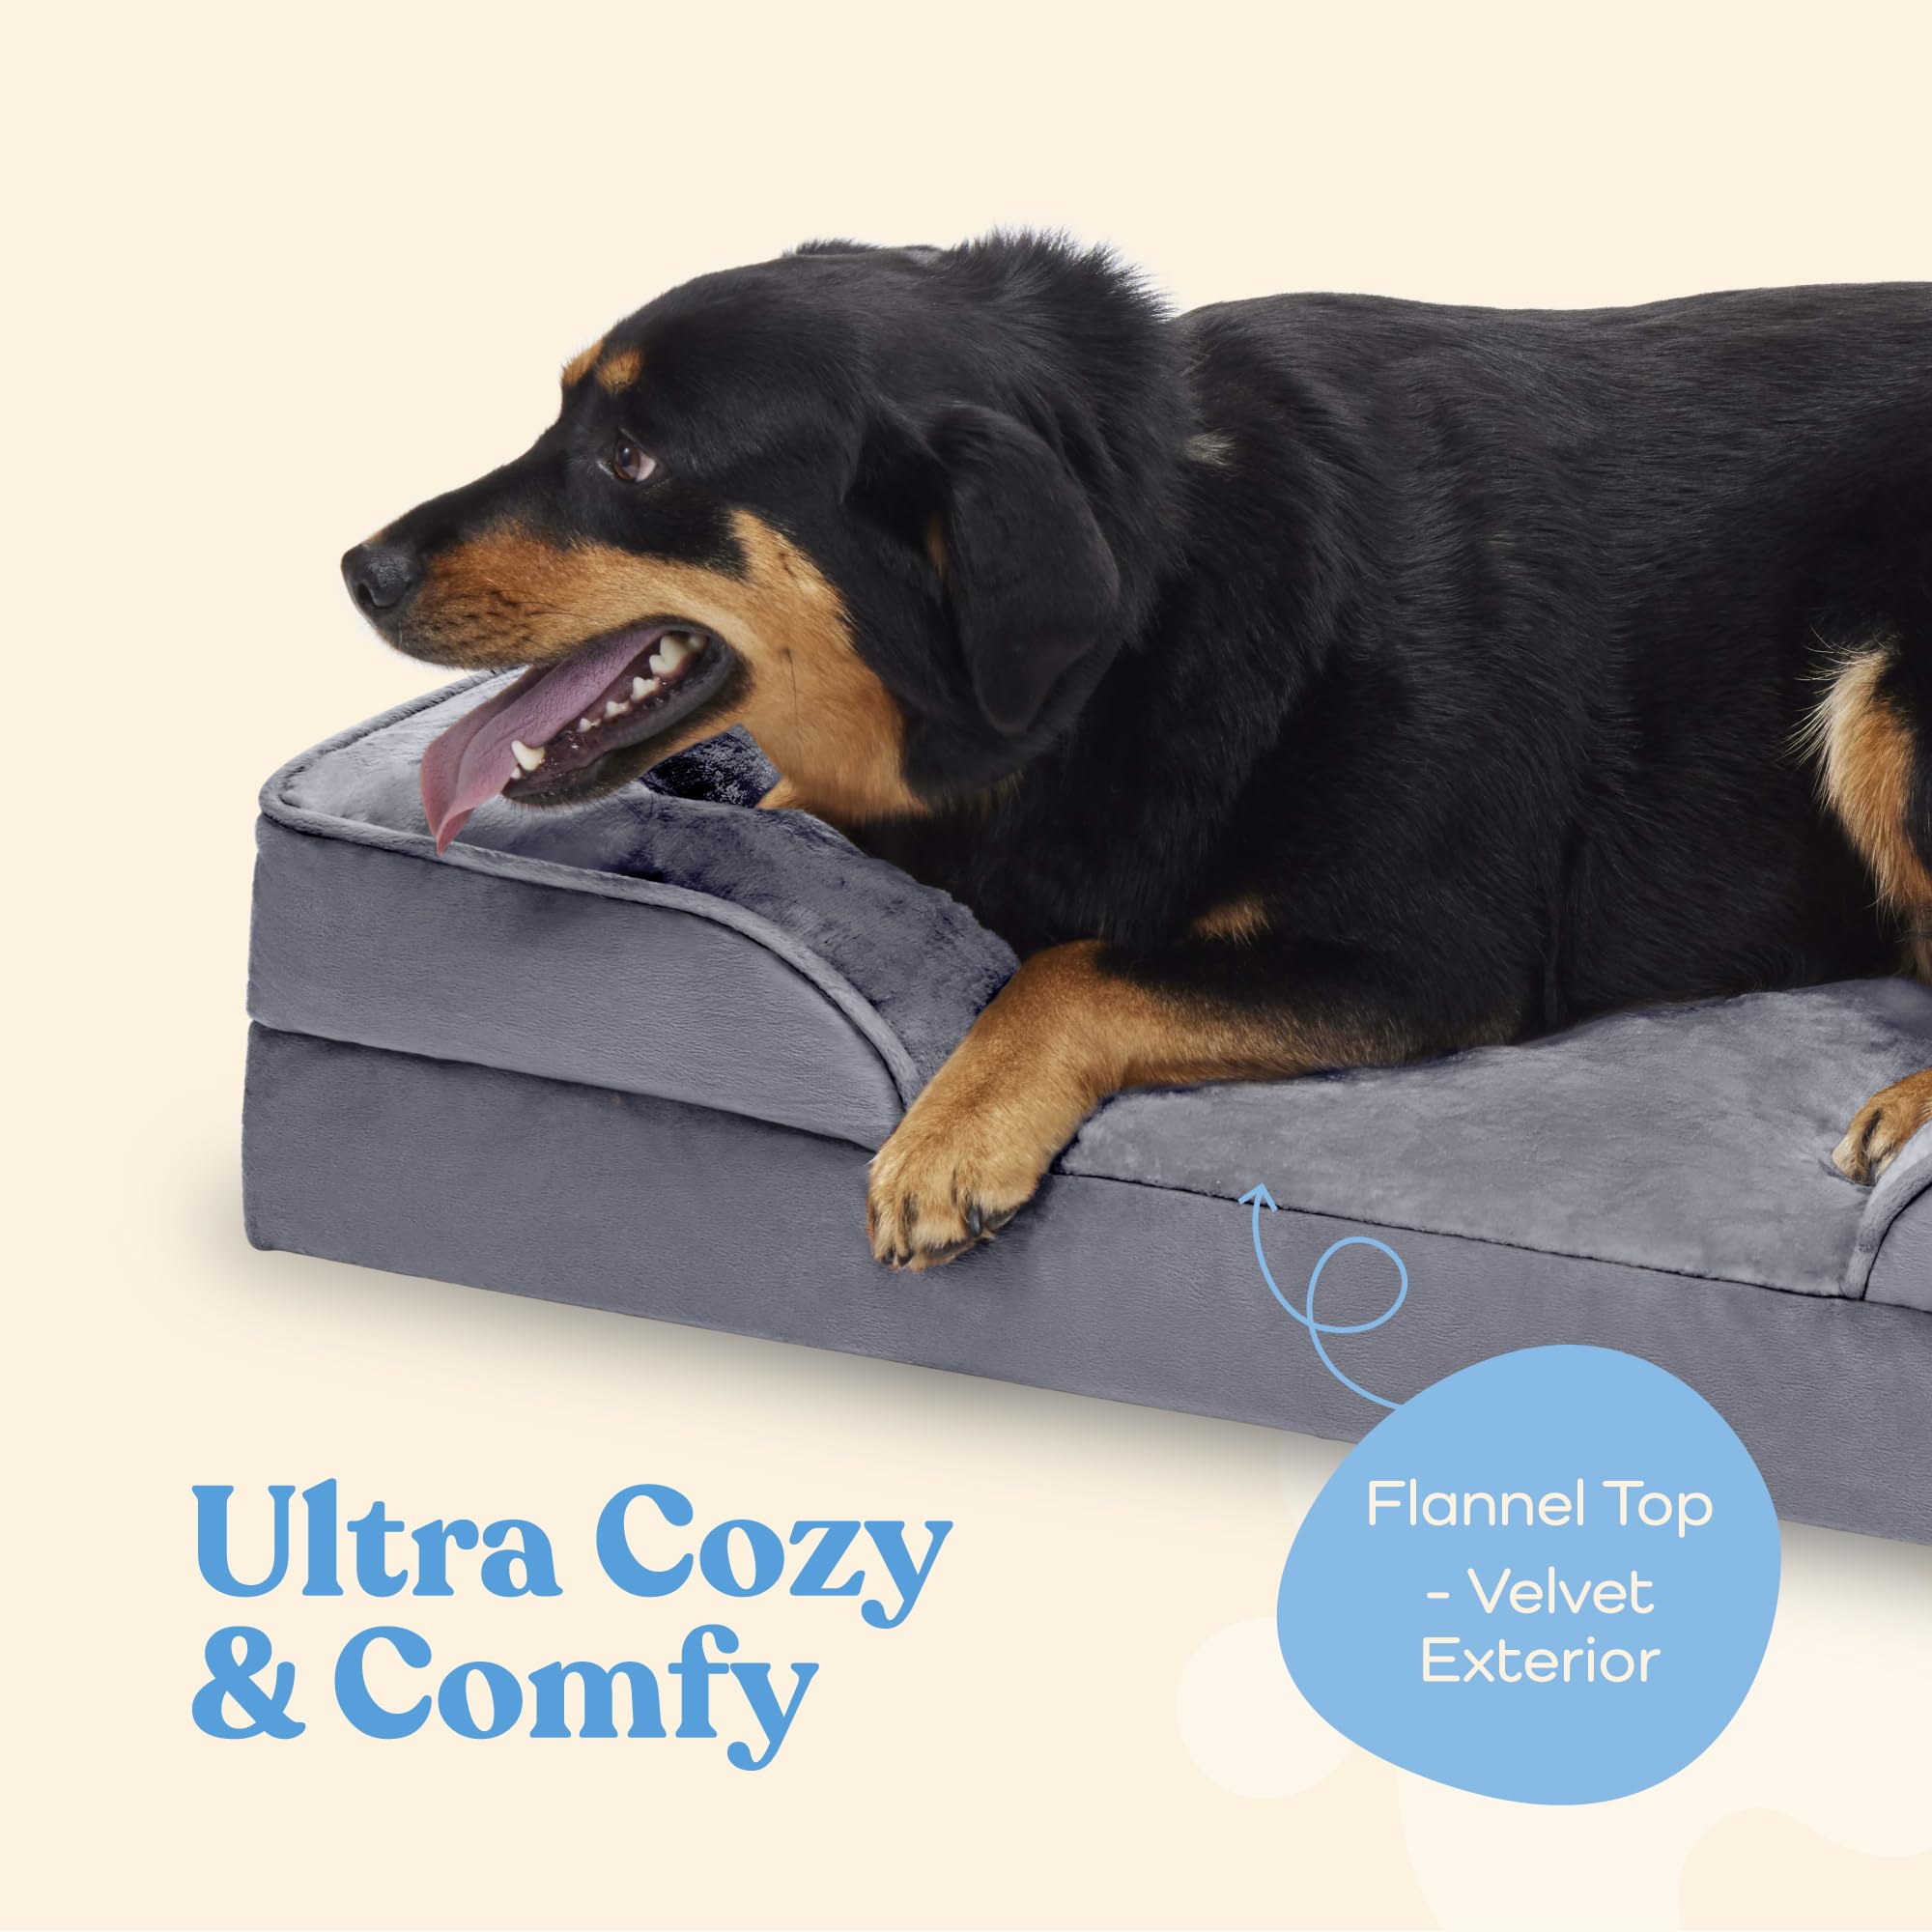 Orthopedic Sofa Dog Bed - Ultra Comfortable Dog Beds for Large Dogs - Breathable & Waterproof Pet Bed- Egg Foam Sofa Bed with Extra Head and Neck Support - Removable Washable Cover & Nonslip Bottom.  - Like New